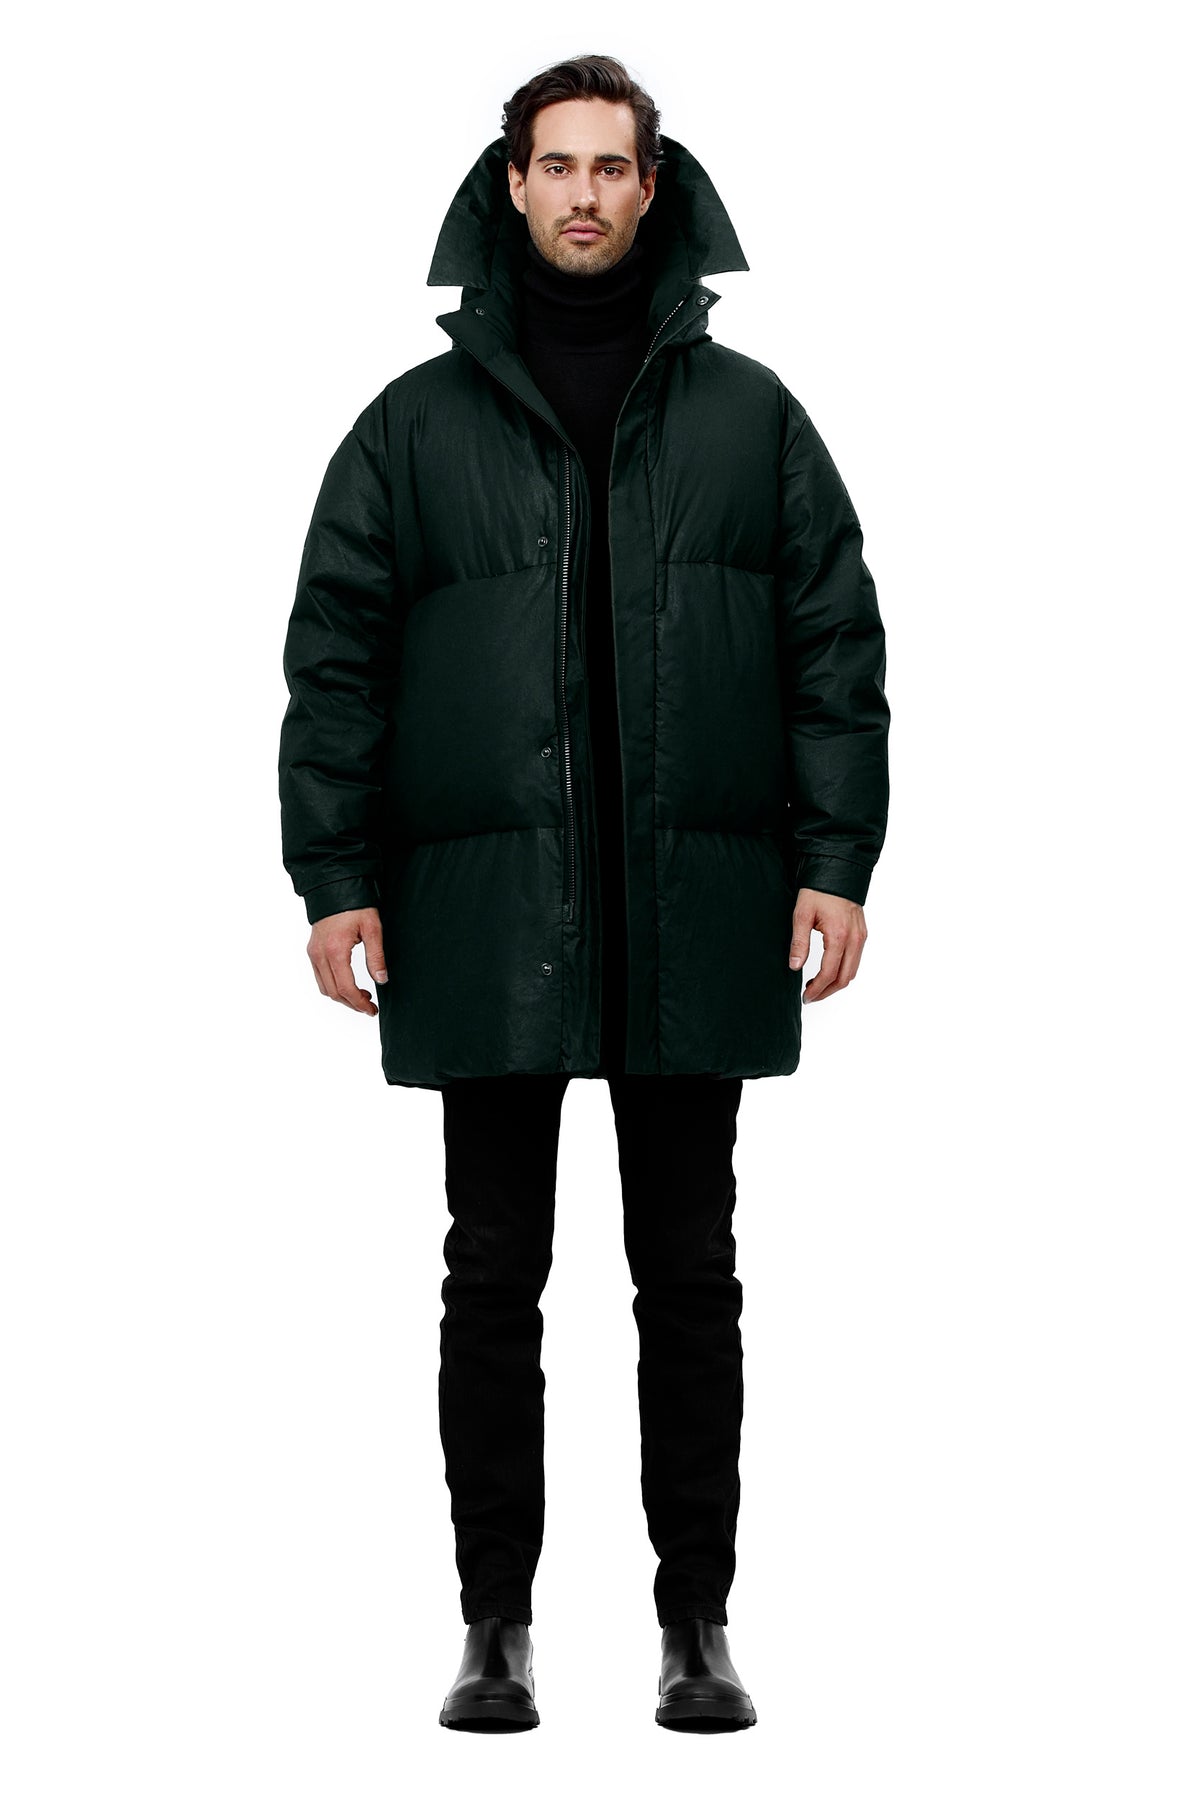 Olmsted Parka Outerwear – The